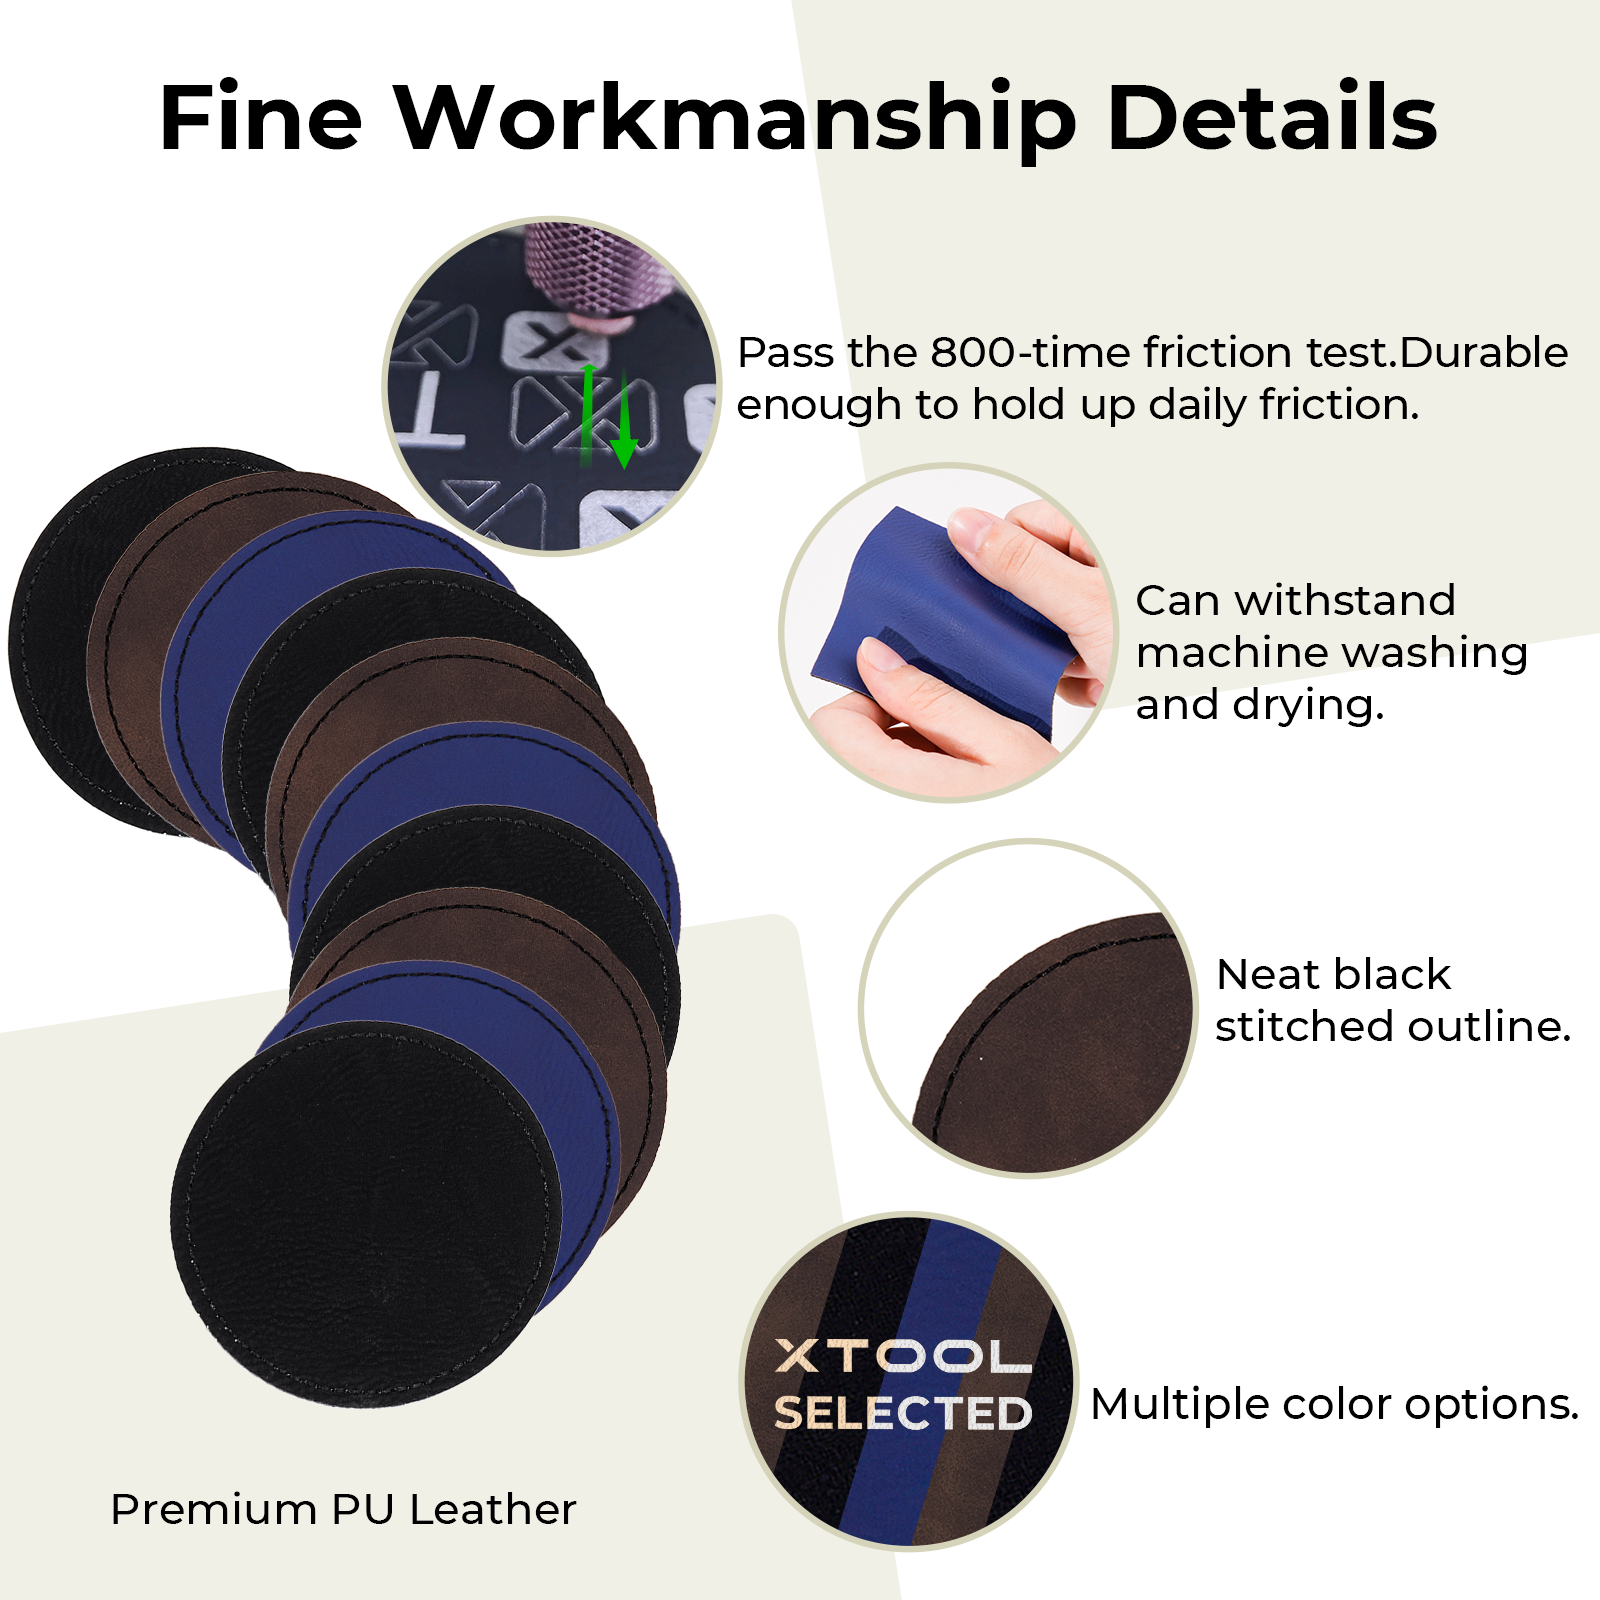 Black to Gold Laserable PU Round Patch (10pcs)